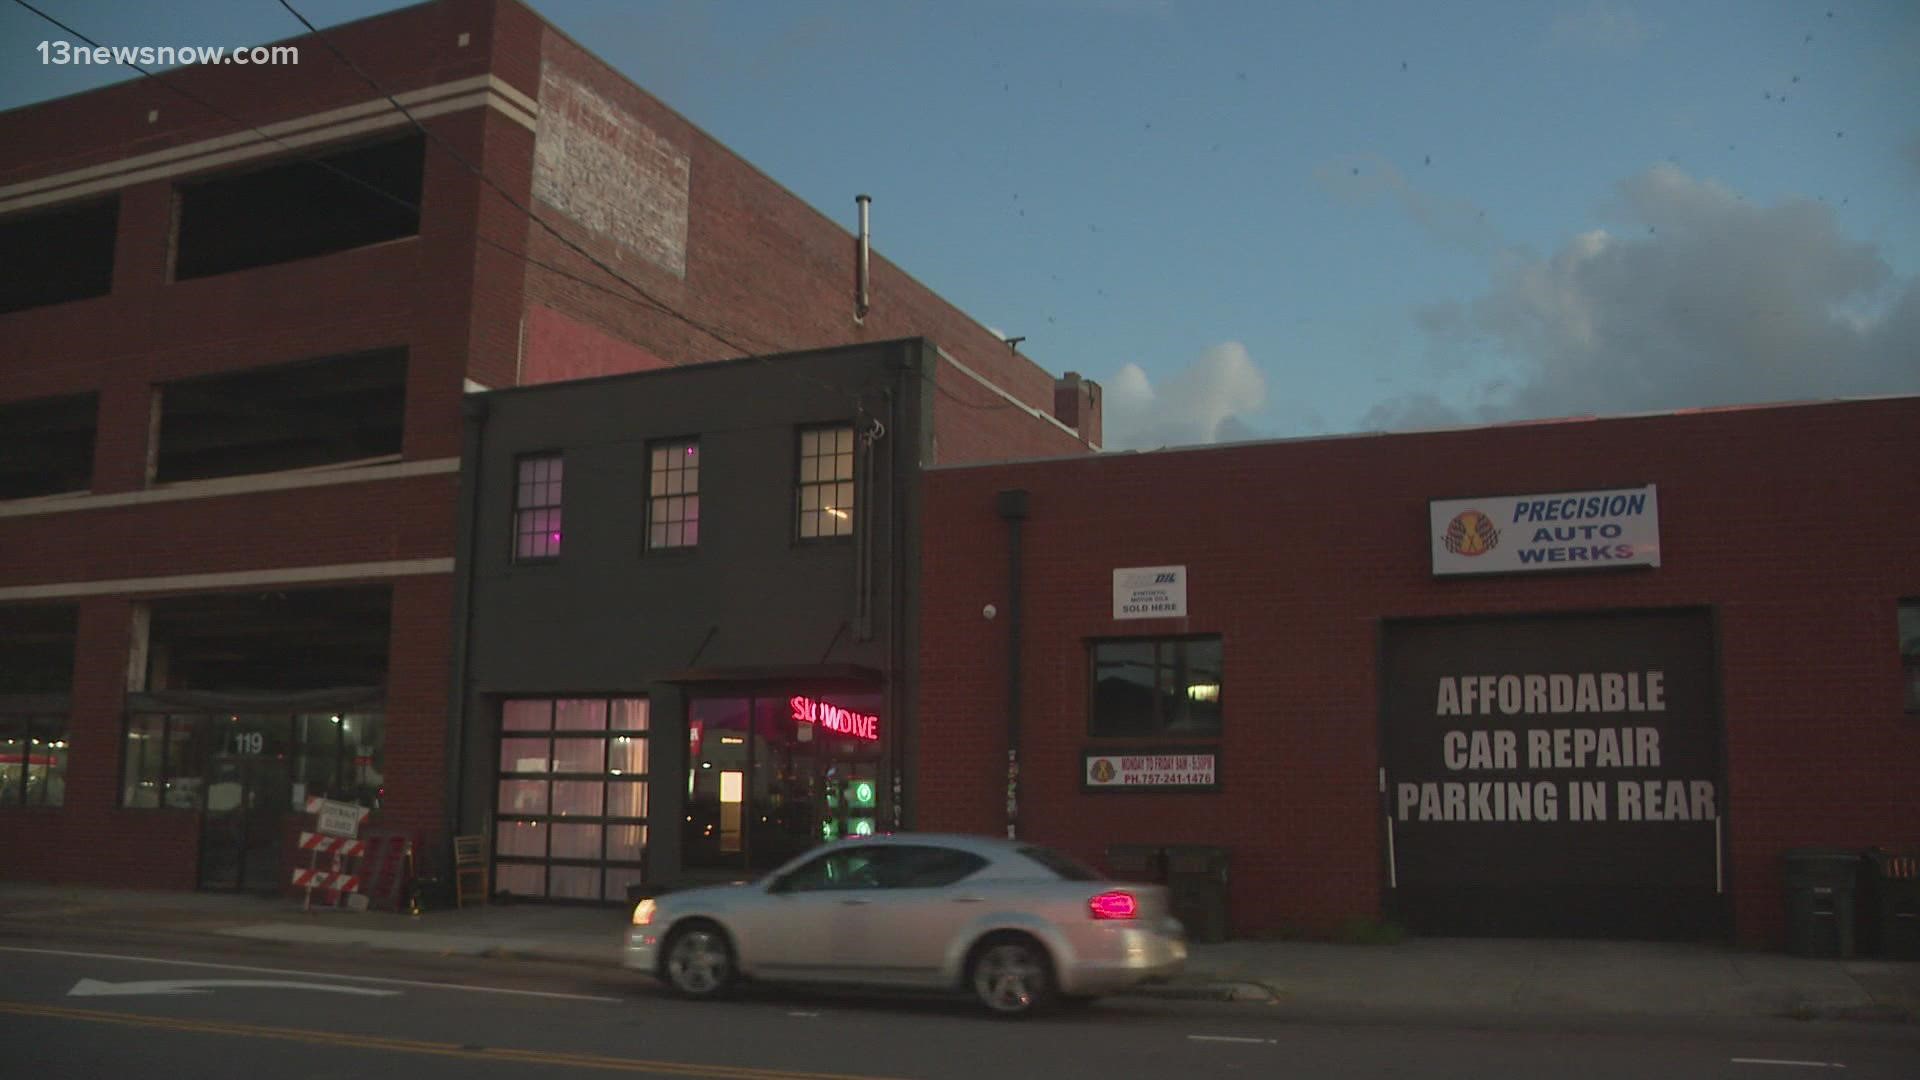 During Tuesday's meeting, the planning commission is asking city council to change certain zoning regulations for nightclubs and restaurants.